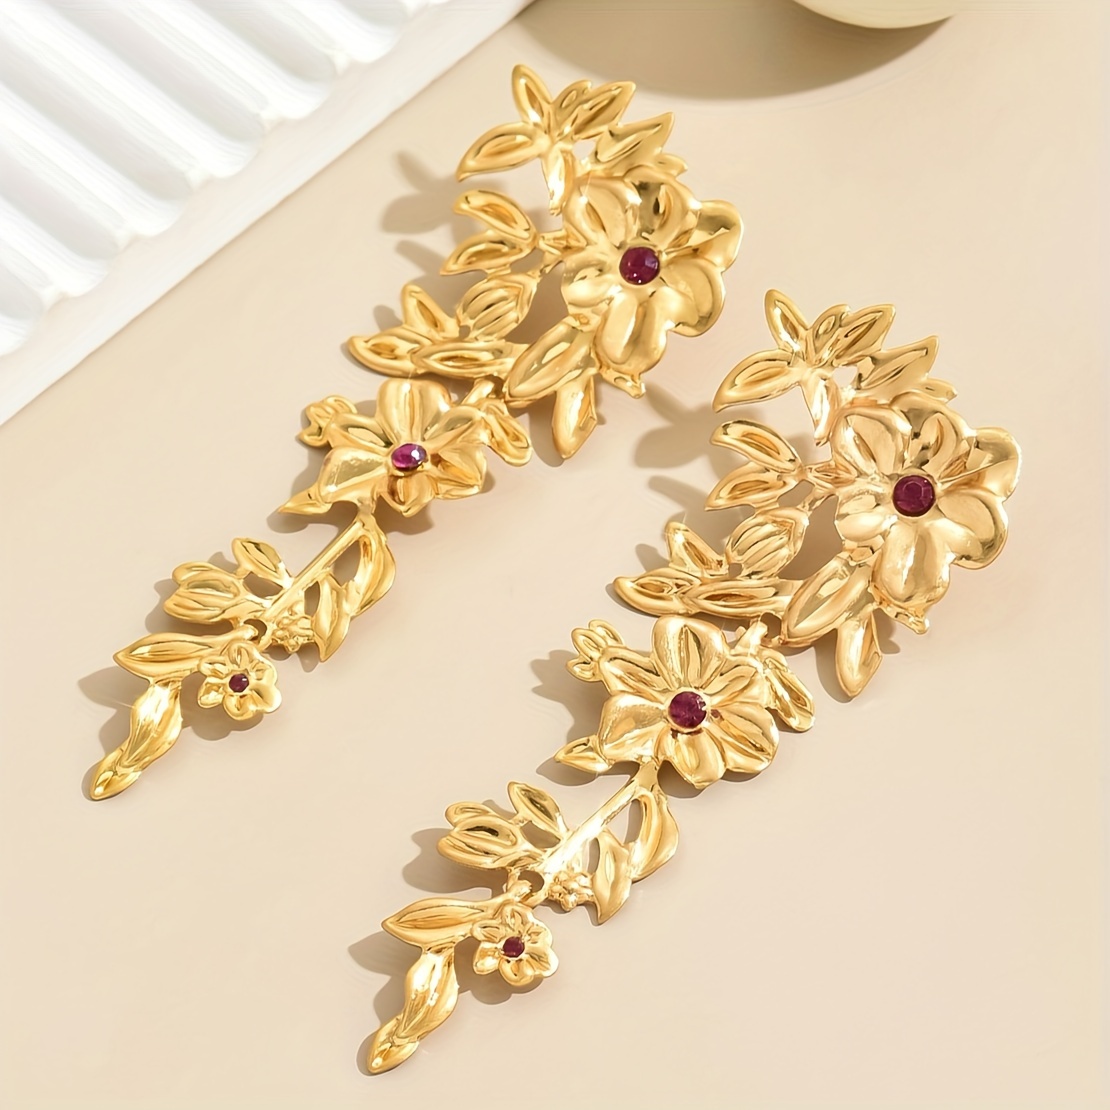 

Jhumka Style Dangle Earrings Golden Flower Design Inlaid Rhinestone Symbol Of Beauty And Elegance Evening Party Decor Gift For Female